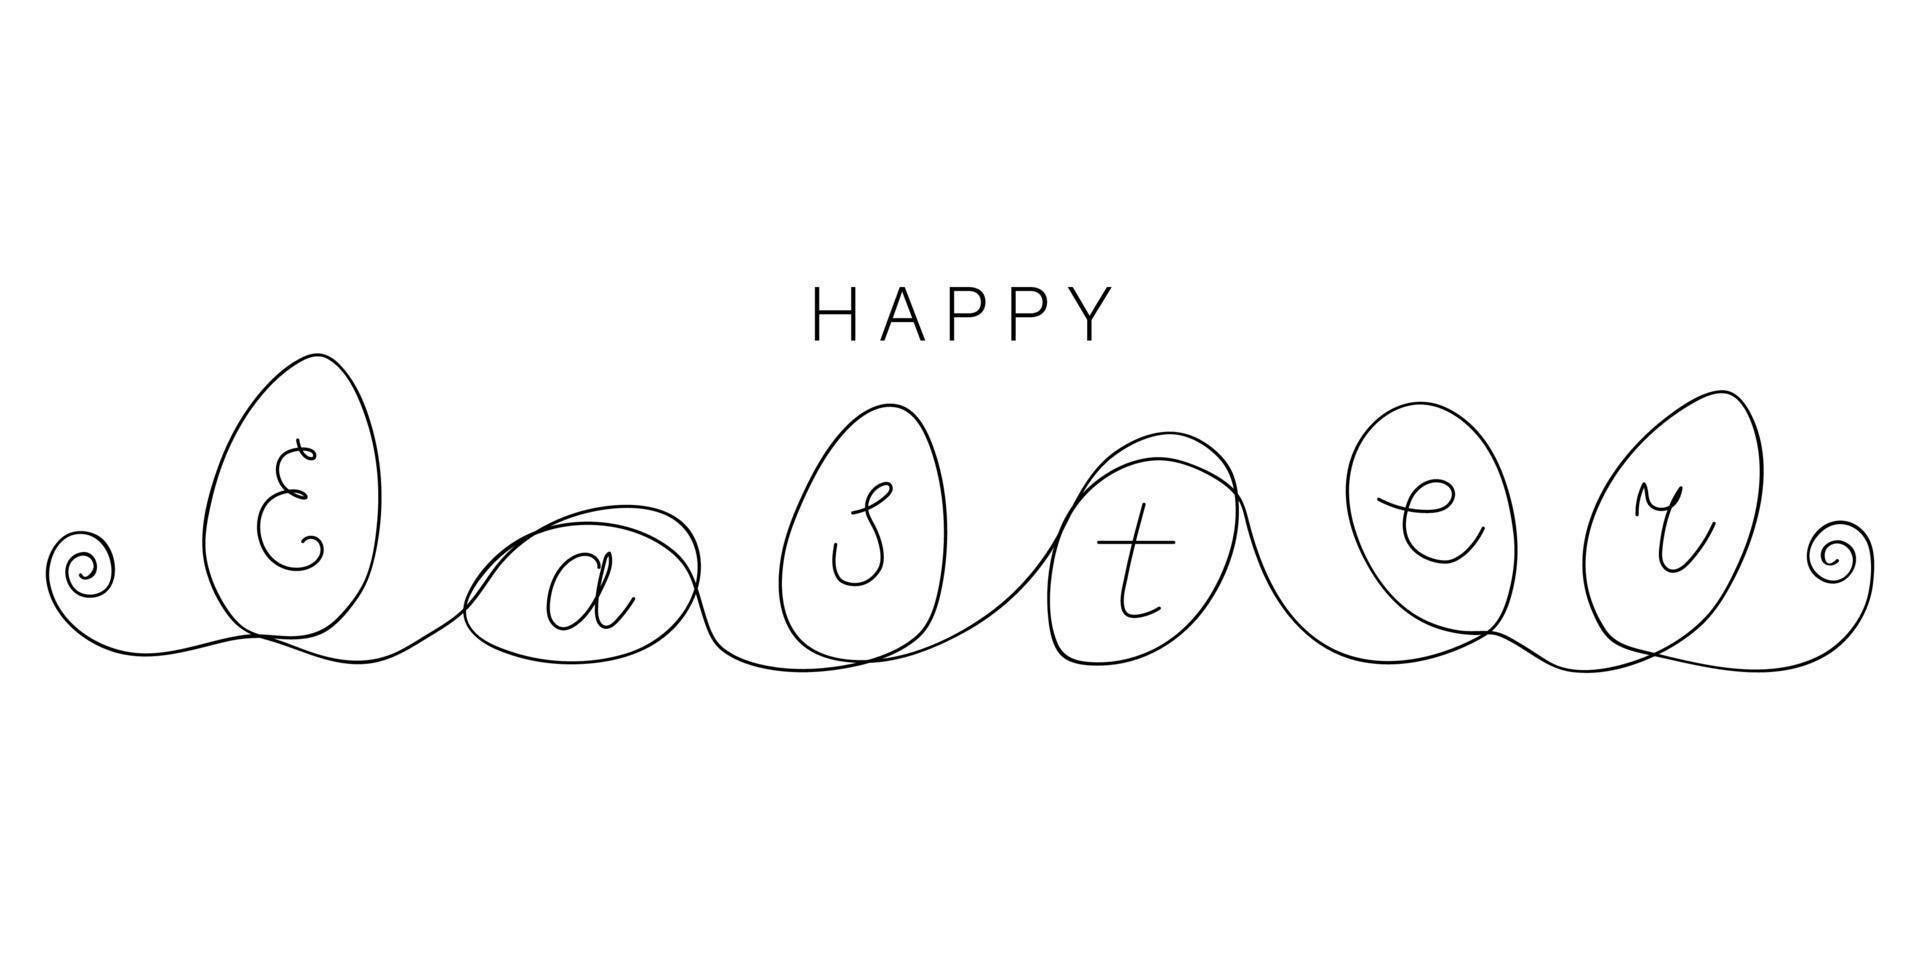 Happy Easter text with rolling eggs drawn by one line. Festive sketch. Horizontal greeting banner. Minimalist art. Simple vector illustration.